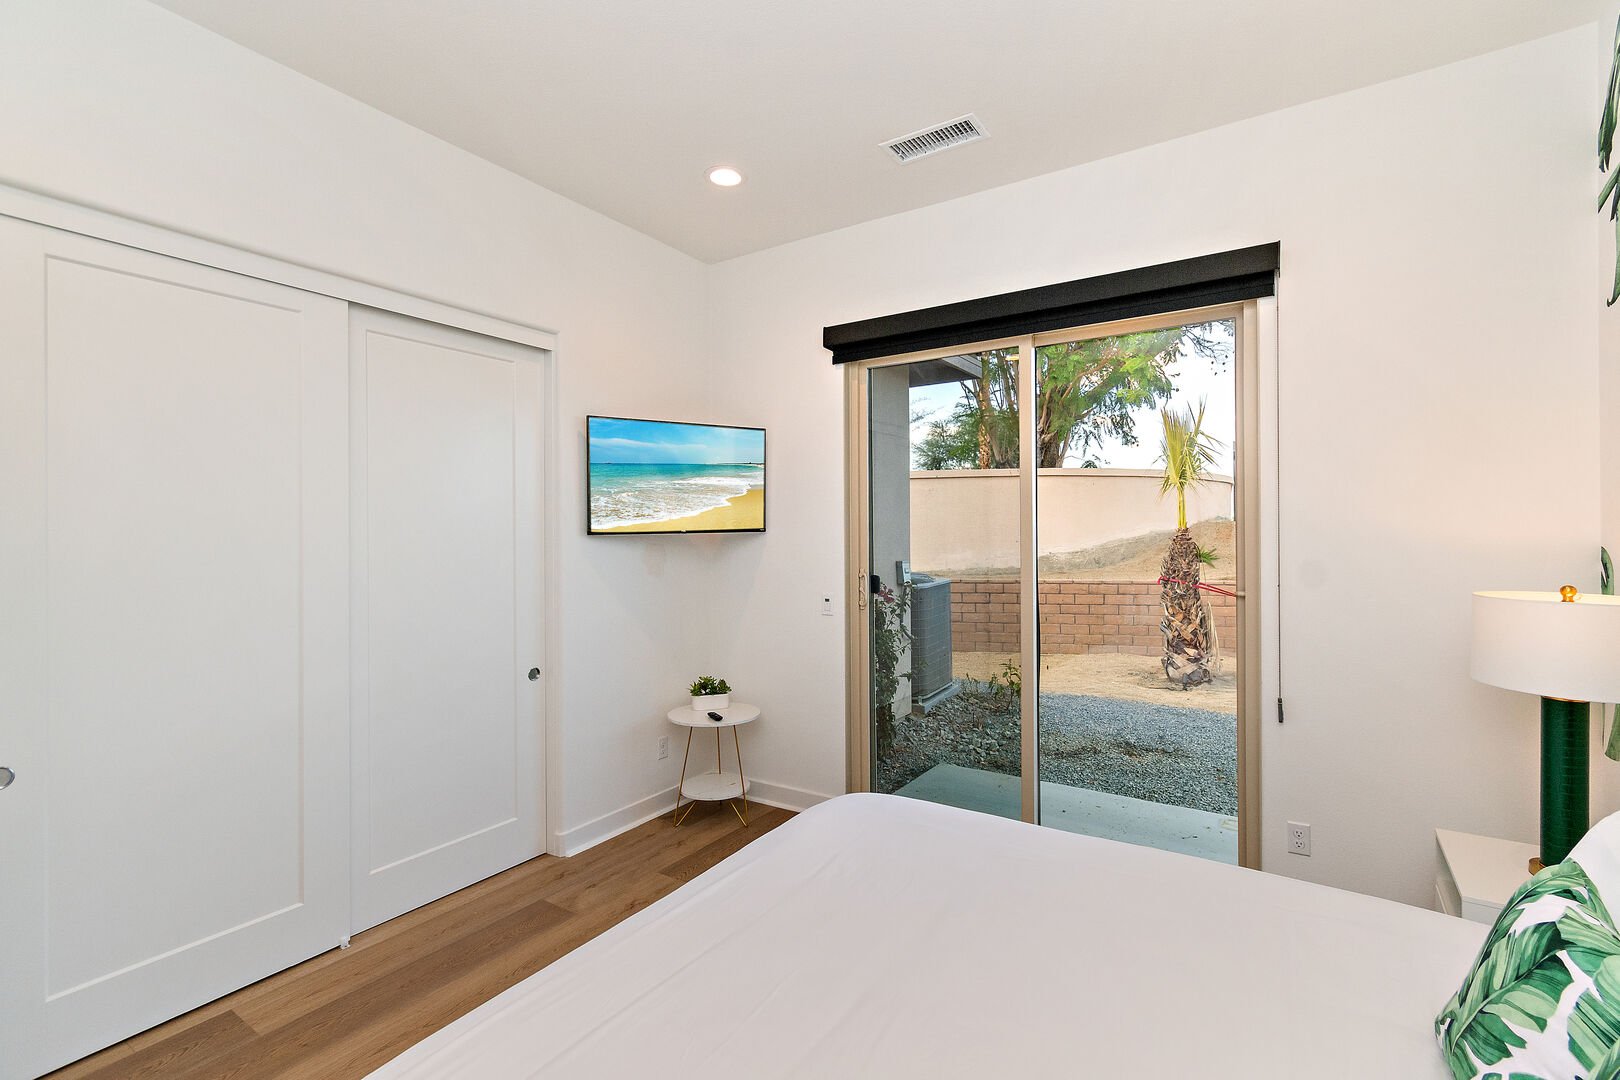 Enjoy access to the back patio from bedroom 2.